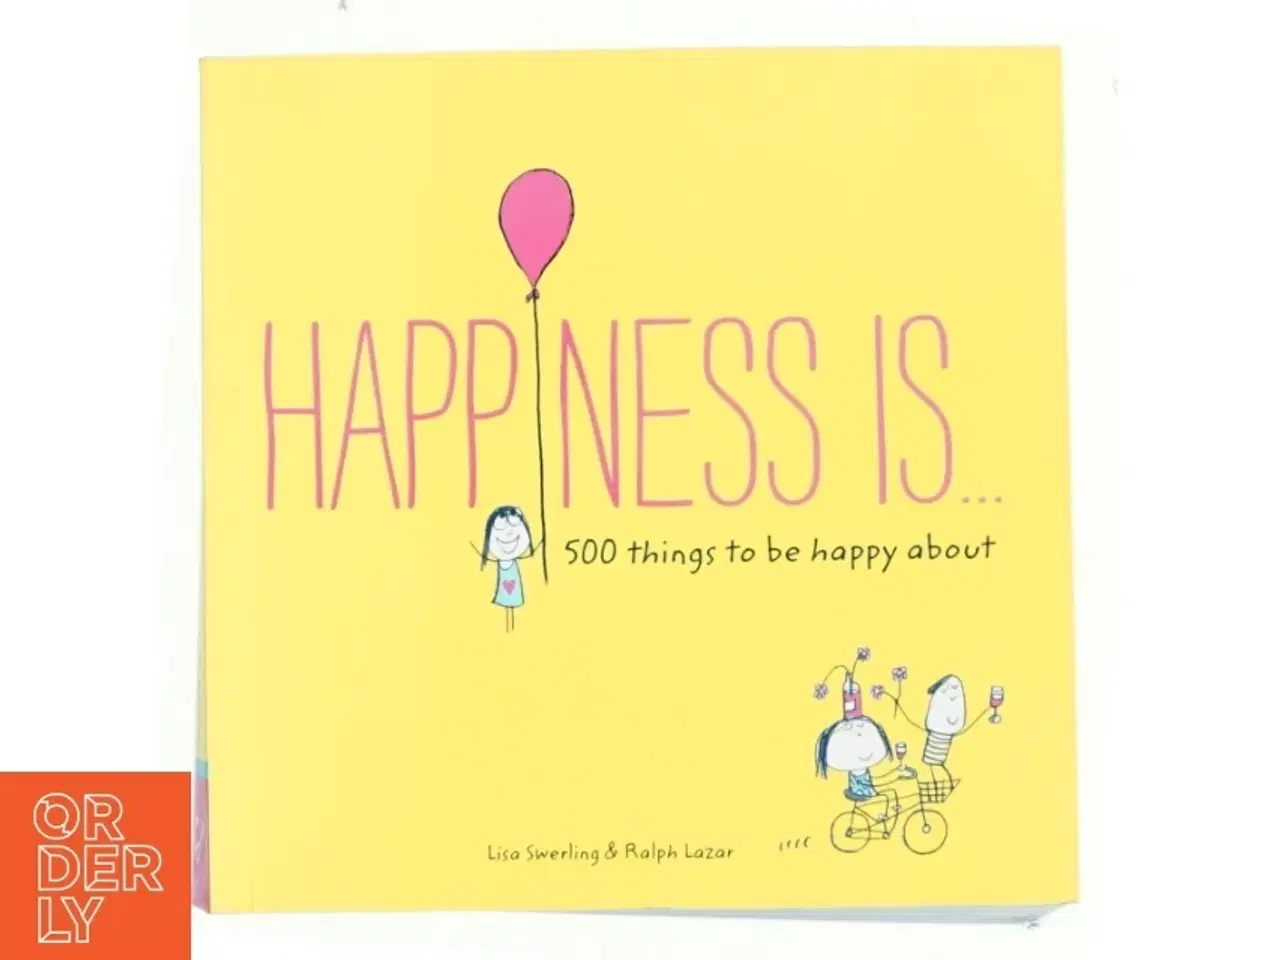 Billede 1 - Happiness is, 500 things to be happy about